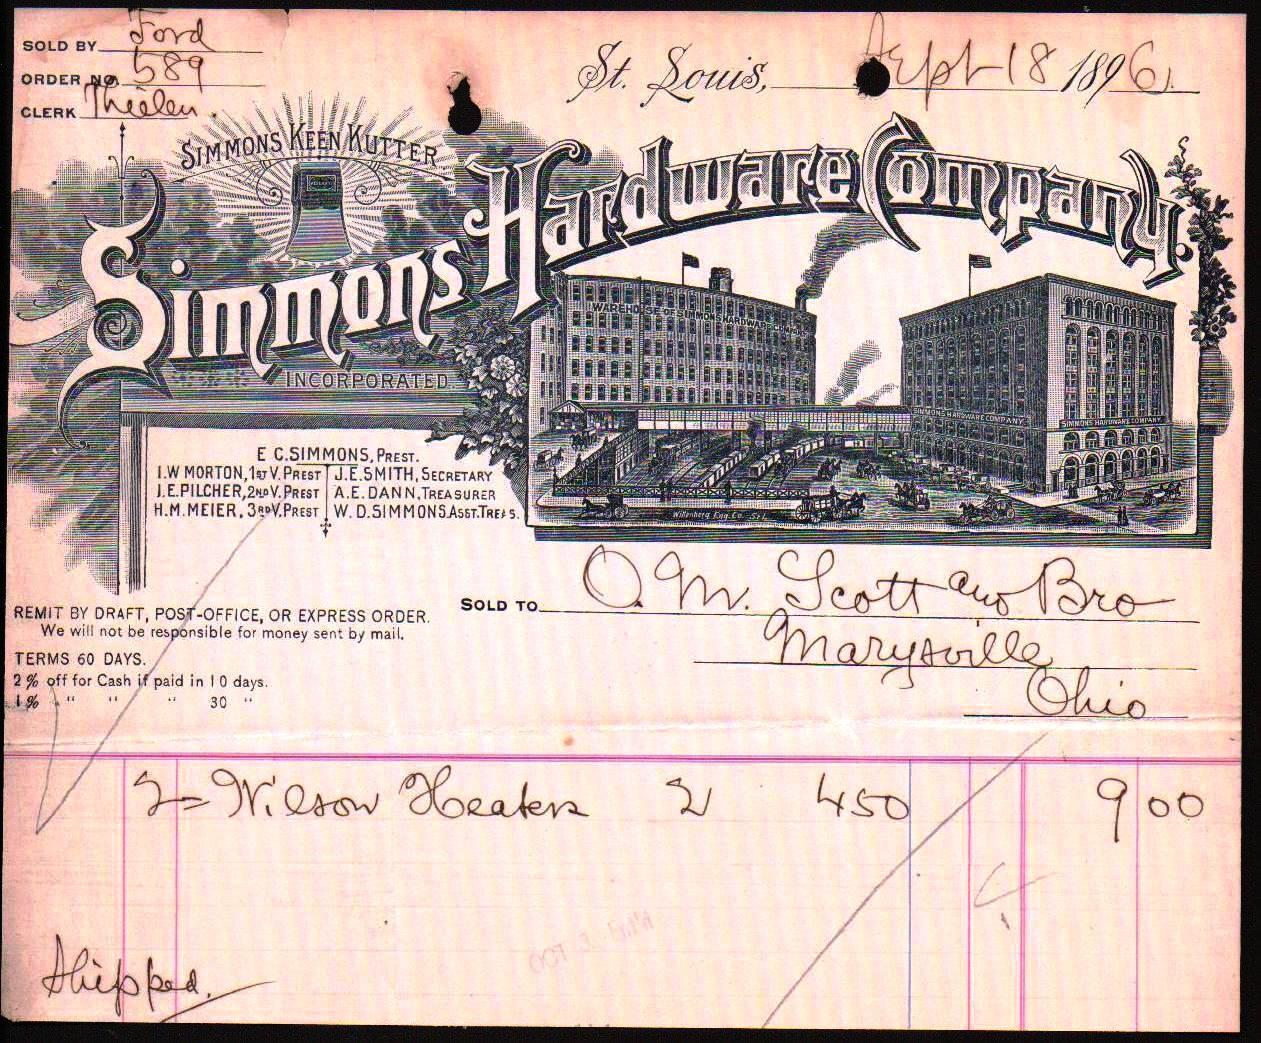 1896 Simmons Hardware Co - Keen Kutter - St Louis Mo - Letter Head History Rare